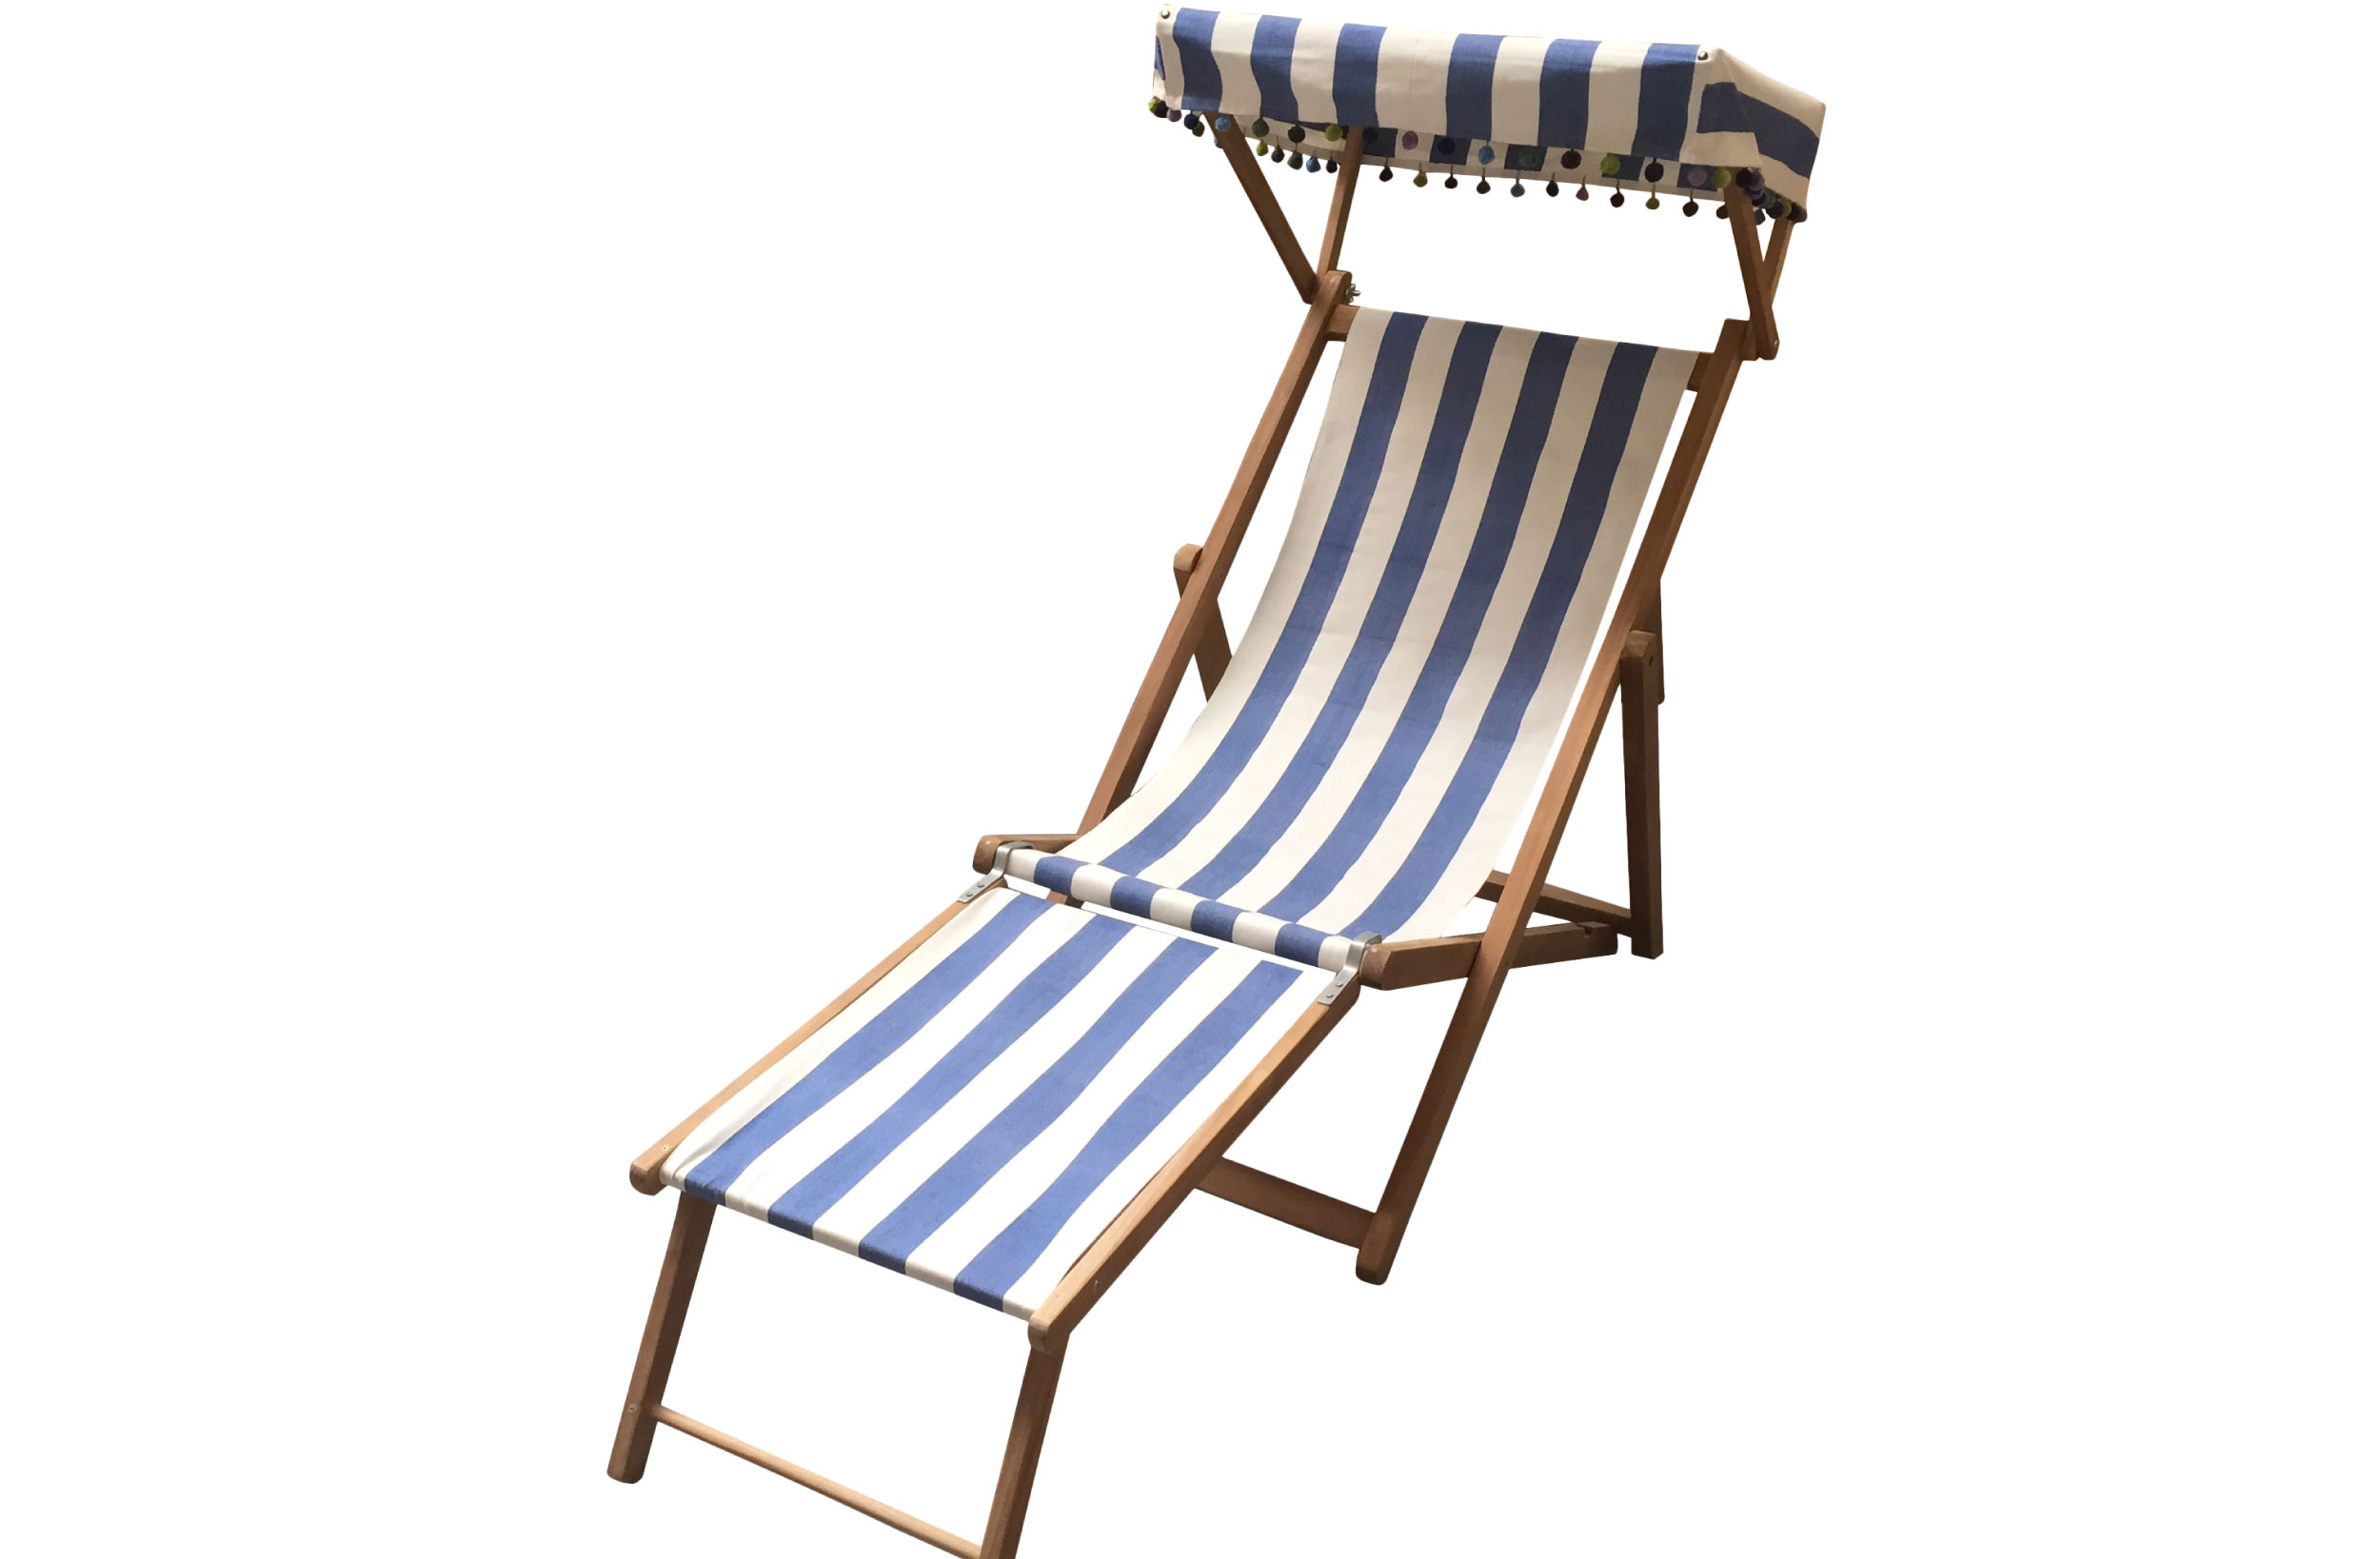 Blue & white striped Edwardian Deckchairs with Canopy and Footstool